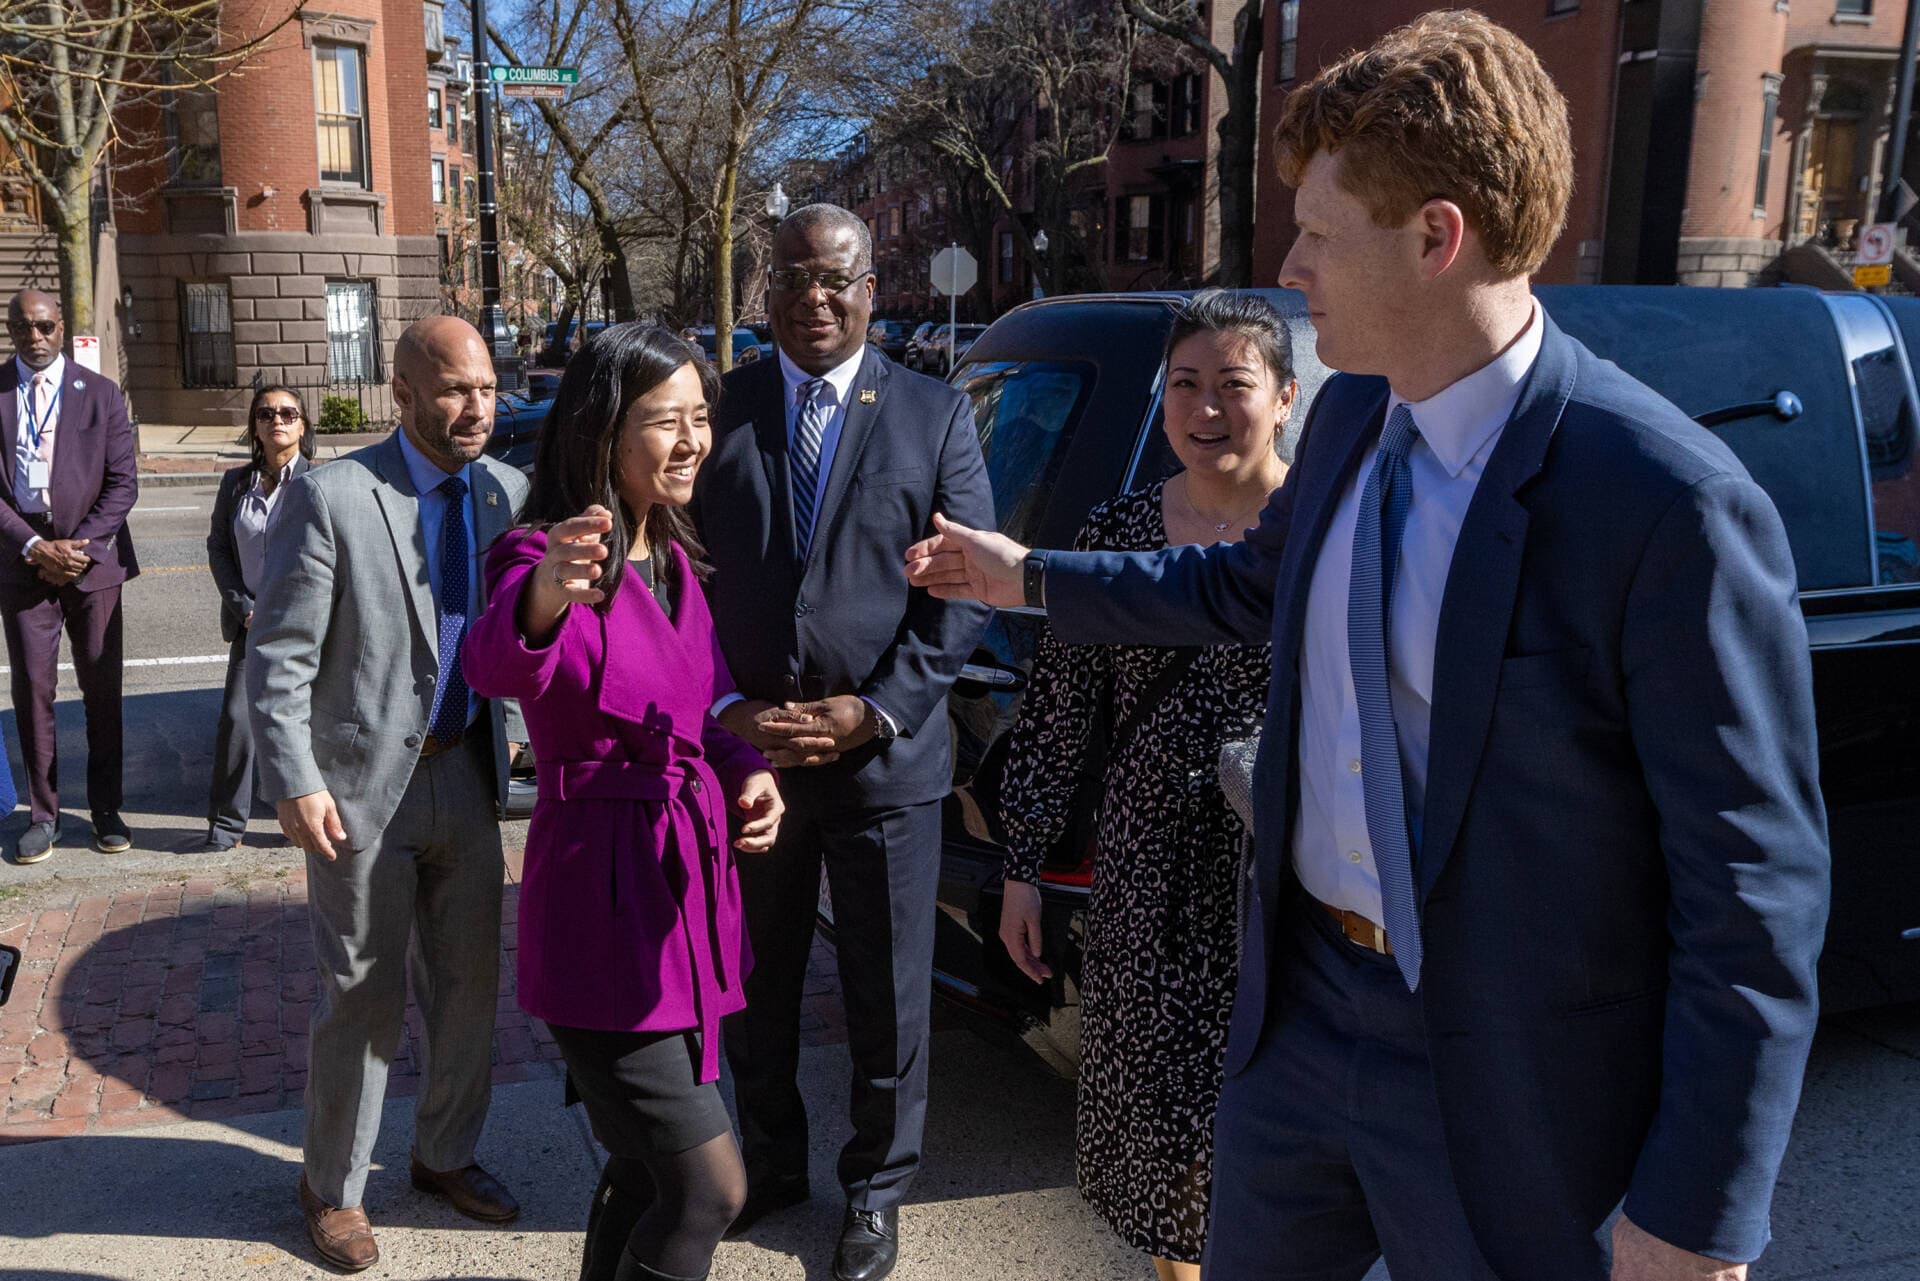 Boston Mayor Michelle Wu greets former U.S Rep. Joe Kennedy III outside of Union United Methodist Church in the South End for the public viewing of Mel King. (Jesse Costa/WBUR)